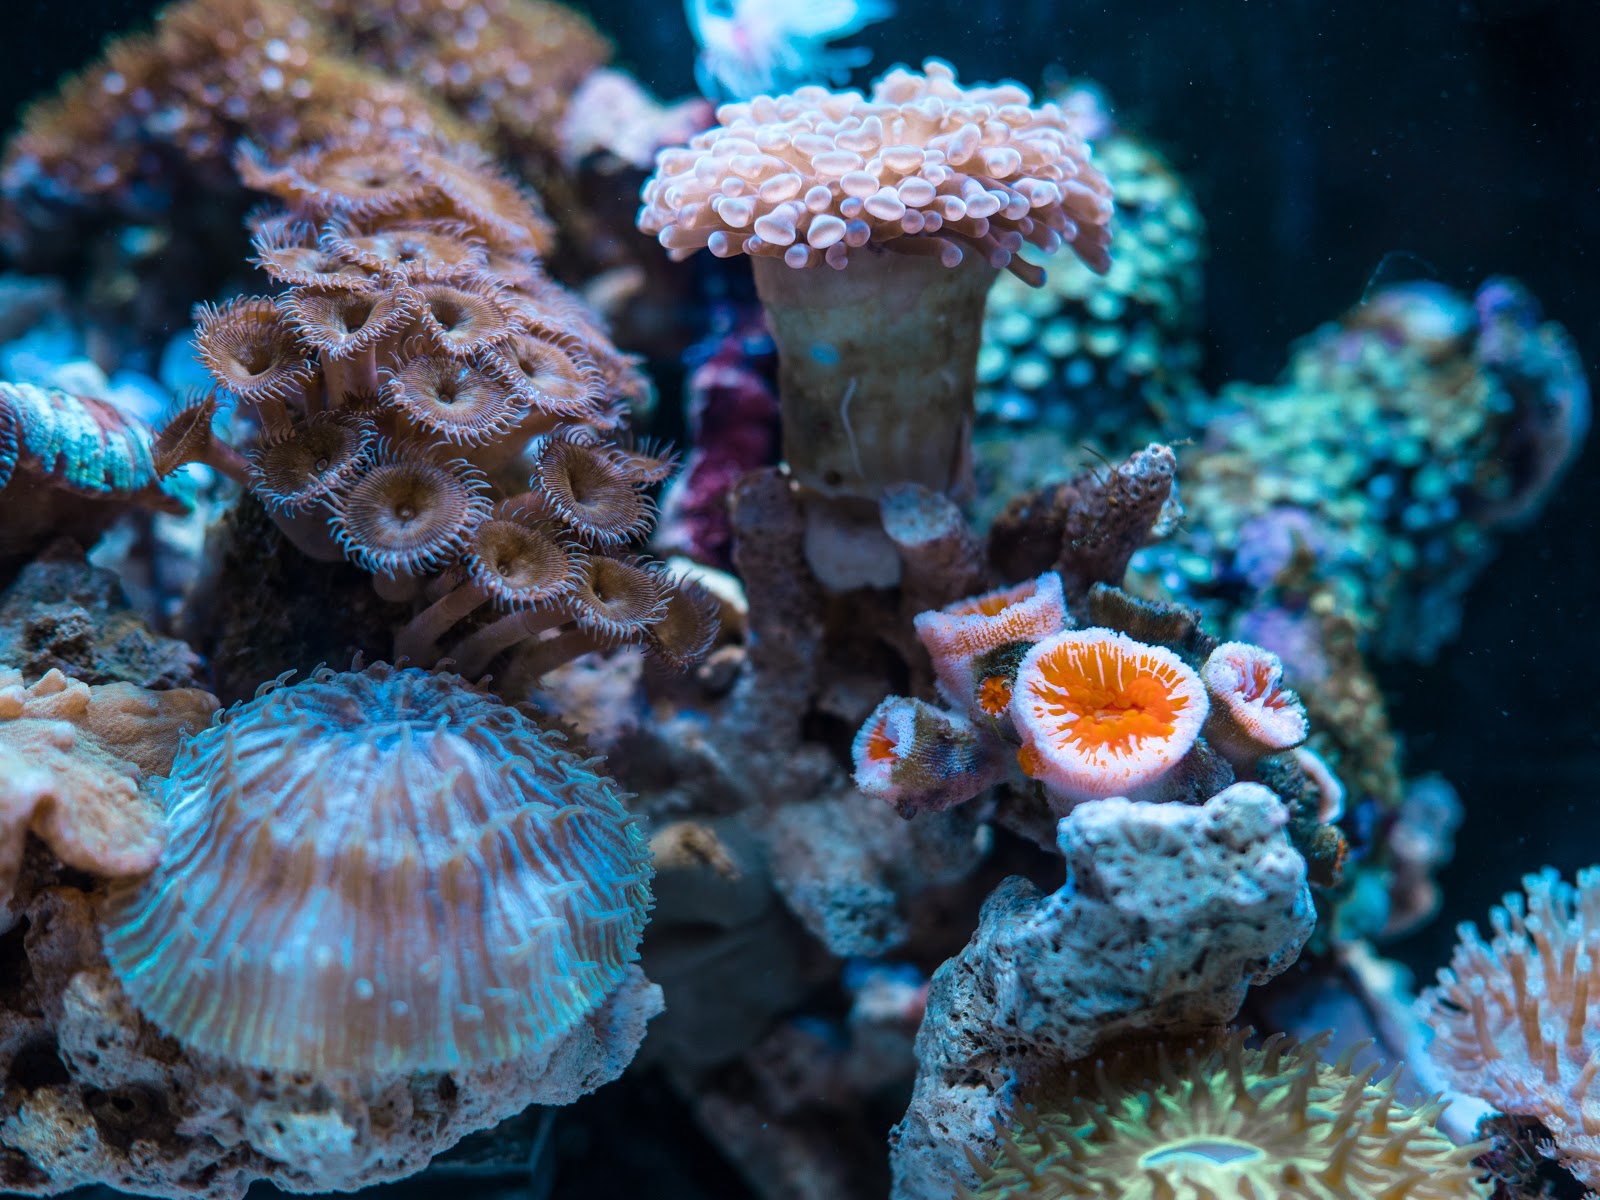 This is an image of different species of coral captured by Jimmy Chang